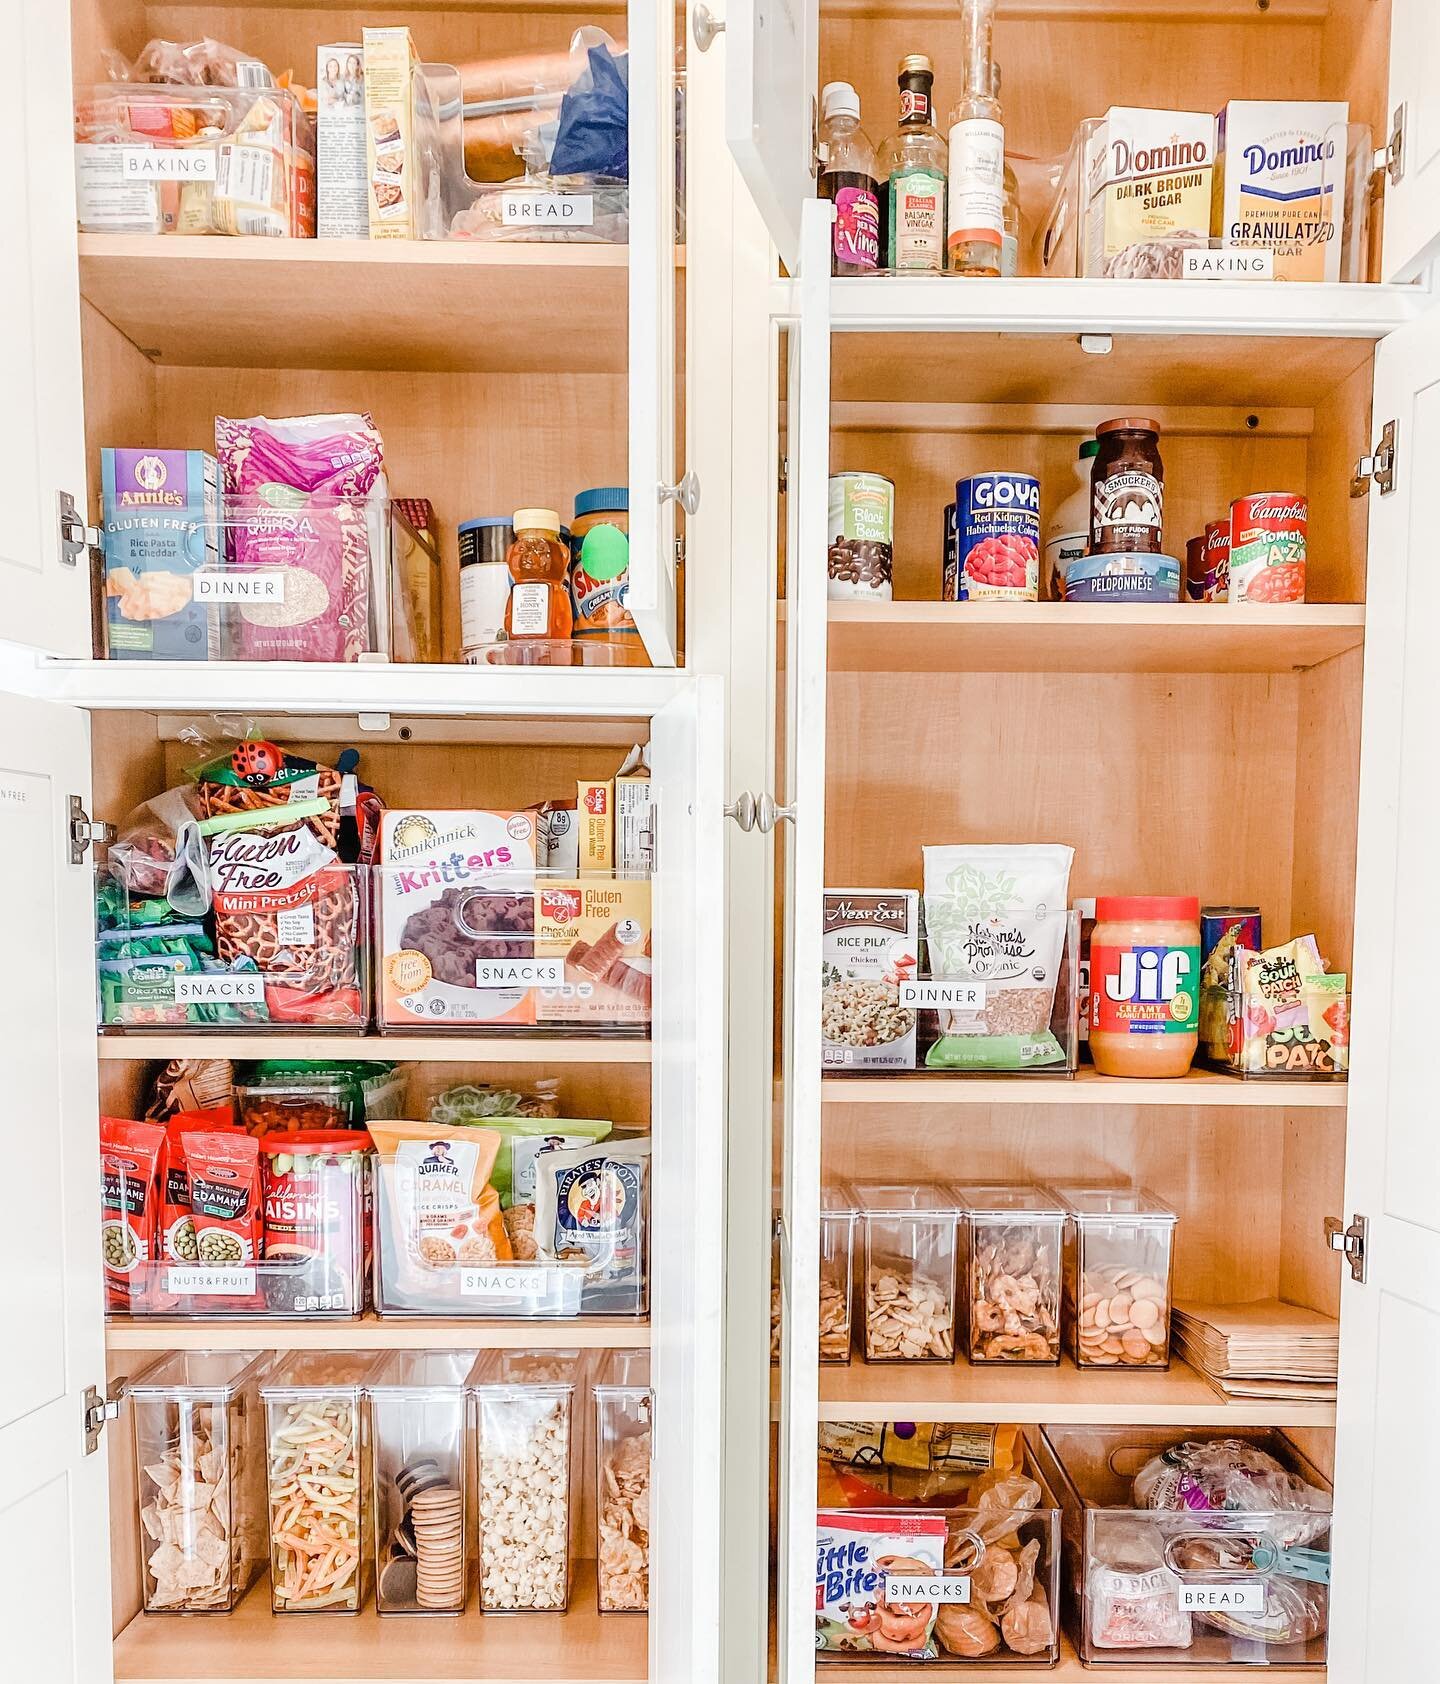 Cooking is hard enough, mix in dietary restrictions and it can be overwhelming to cook healthy meals that everyone will eat. 

After speaking with the cleint, I knew I needed to maximize this pantry to its full potential and find bins that were small